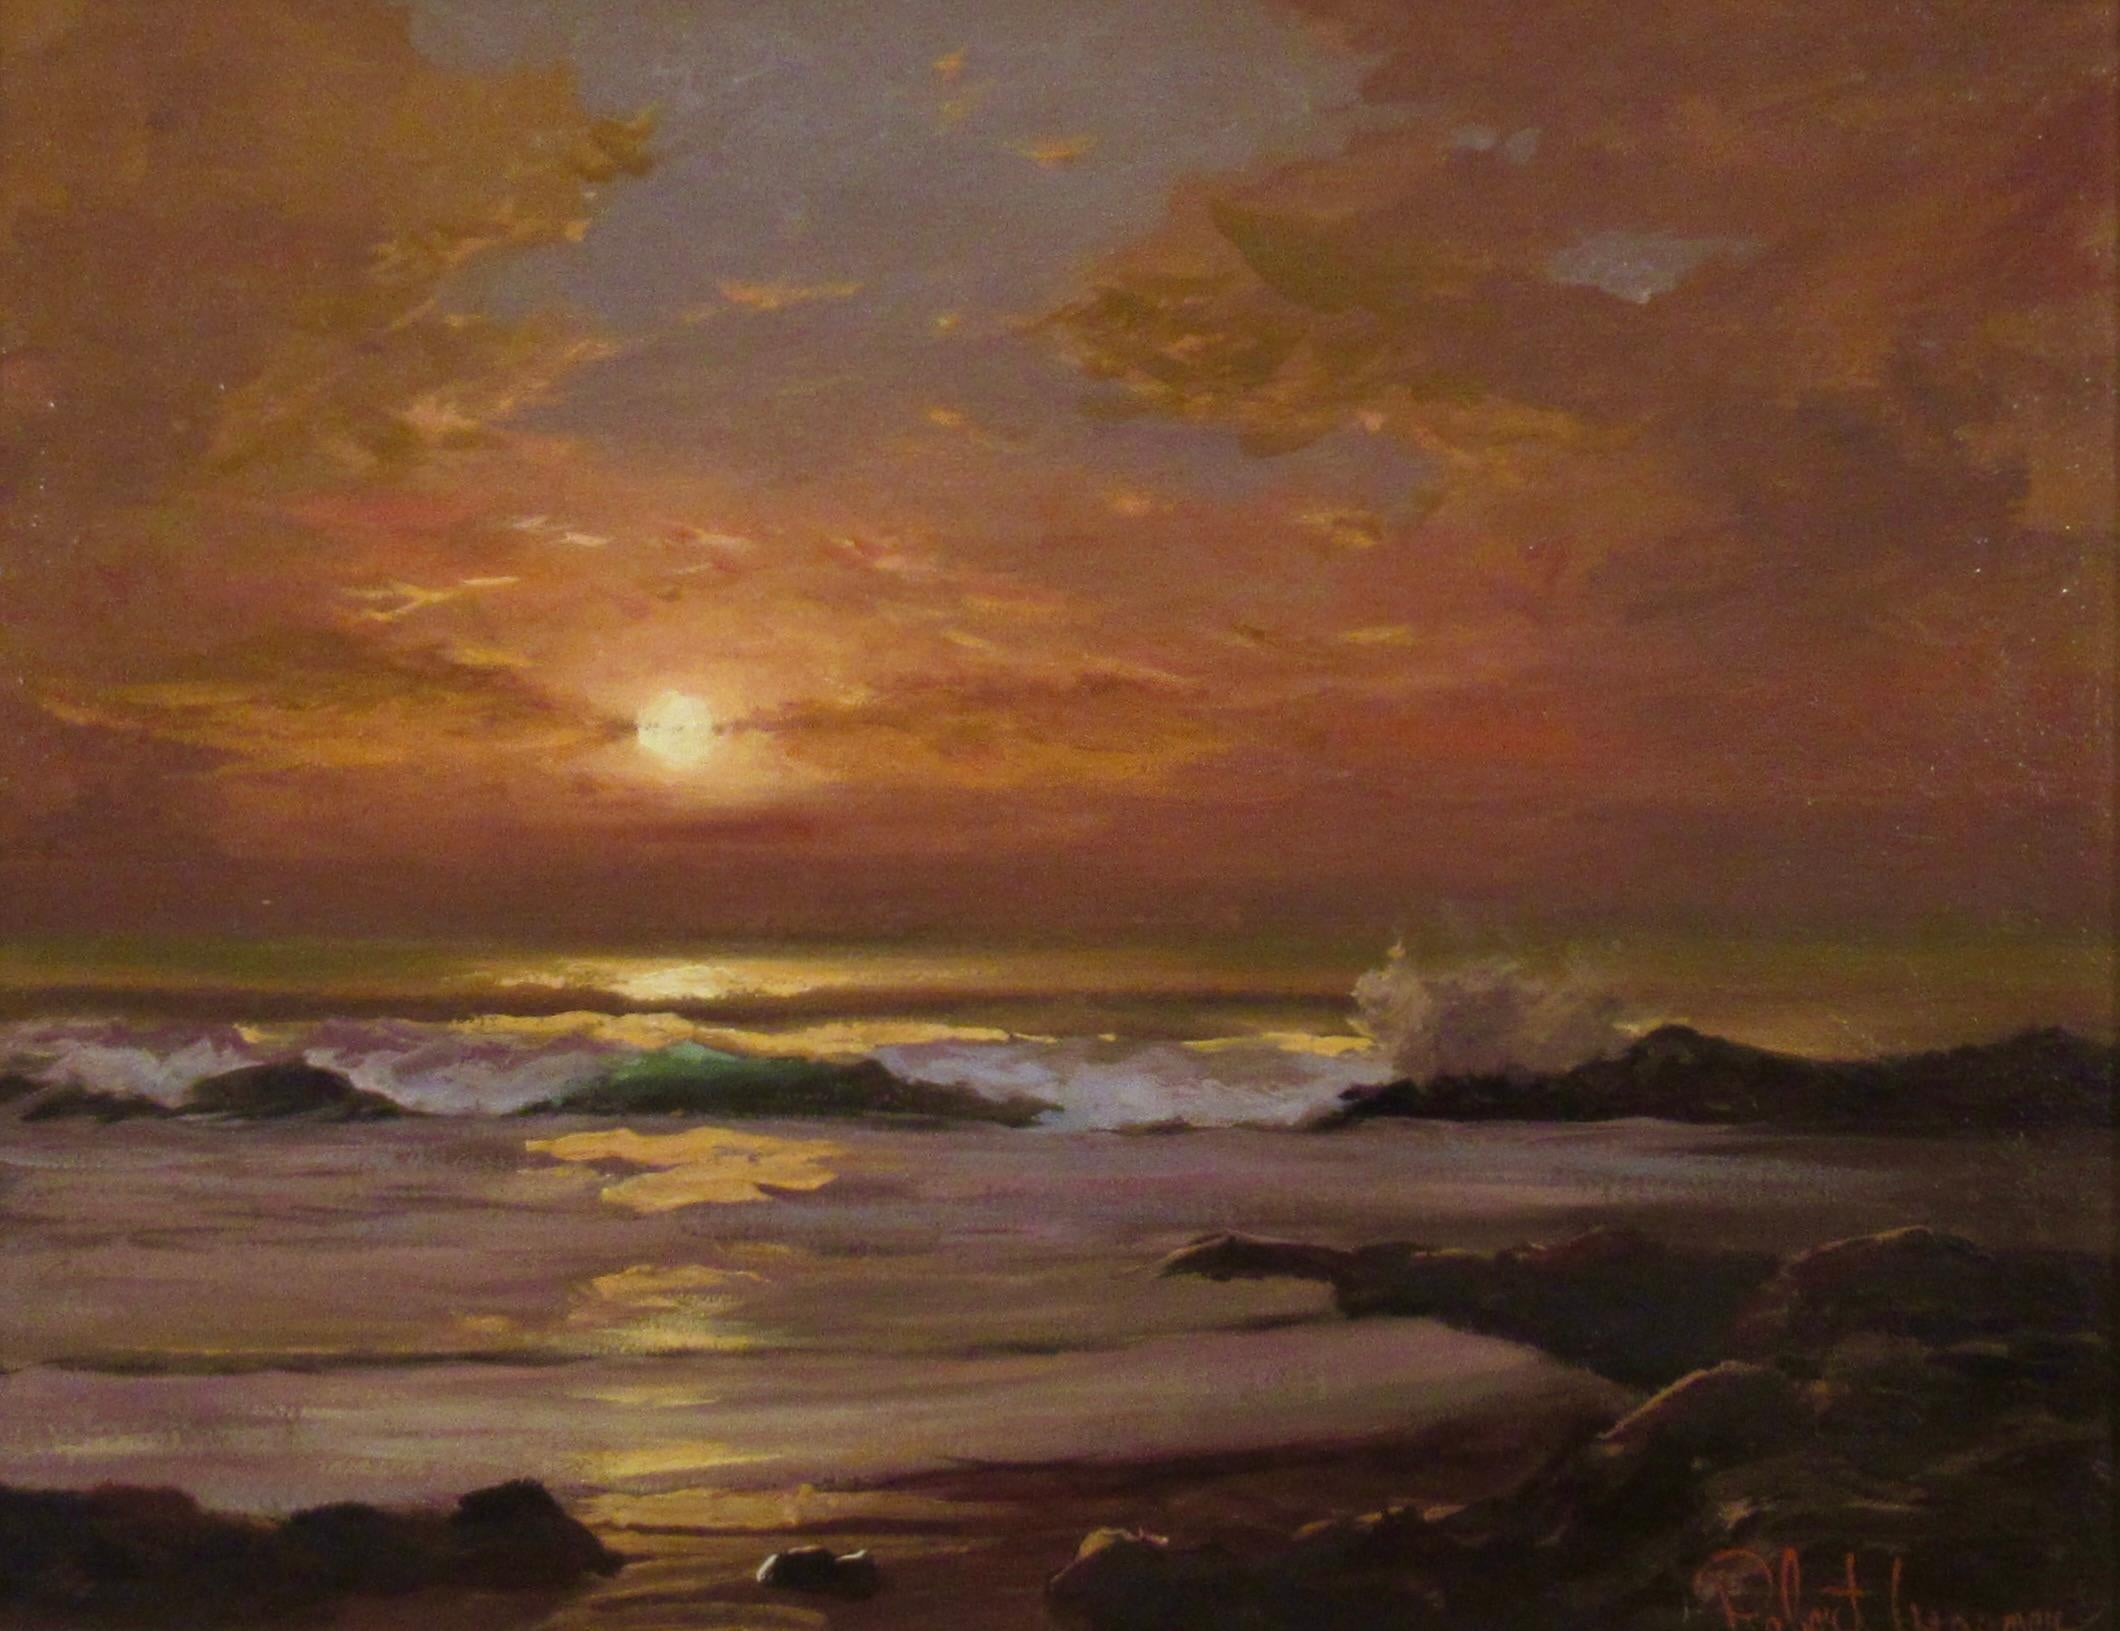 Pacific Sunset - Painting by Robert Wagner